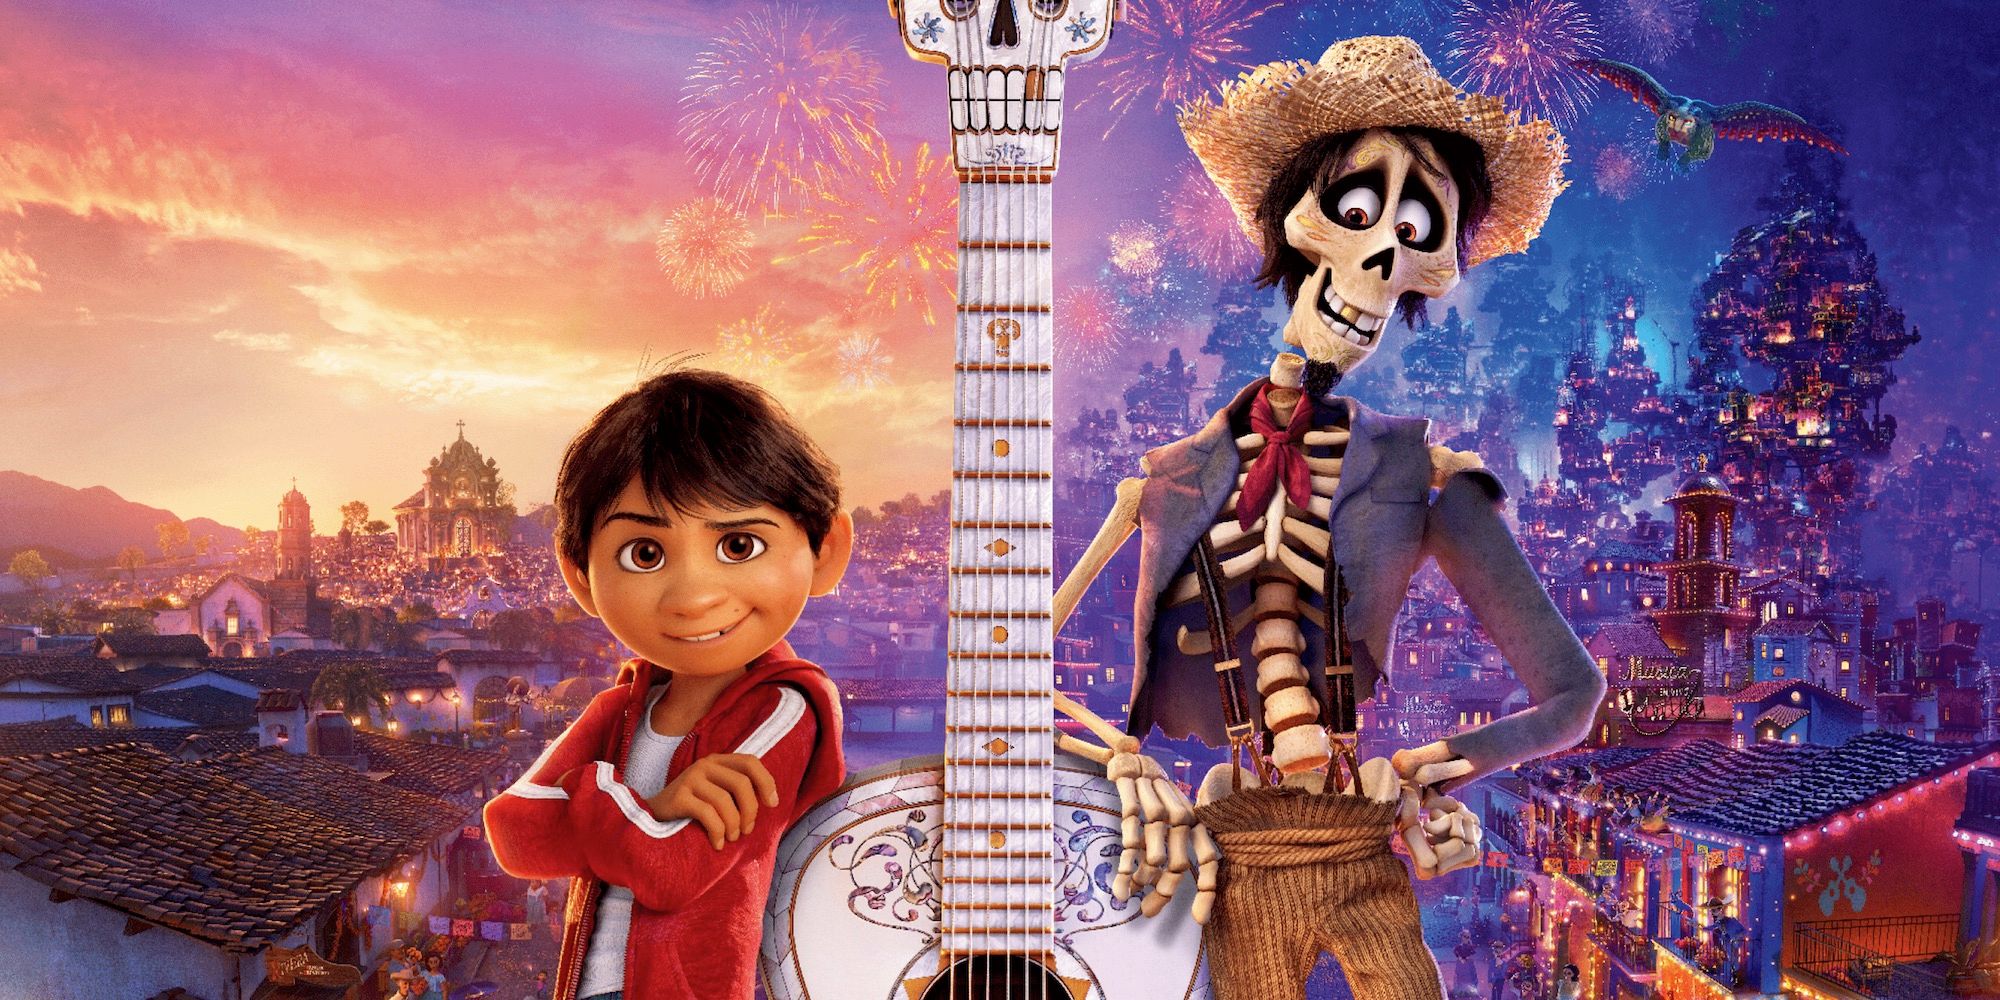 52 Best Images Coco 2 Movie Trailer : COCO | Teaser Trailer | Official Disney - YouTube